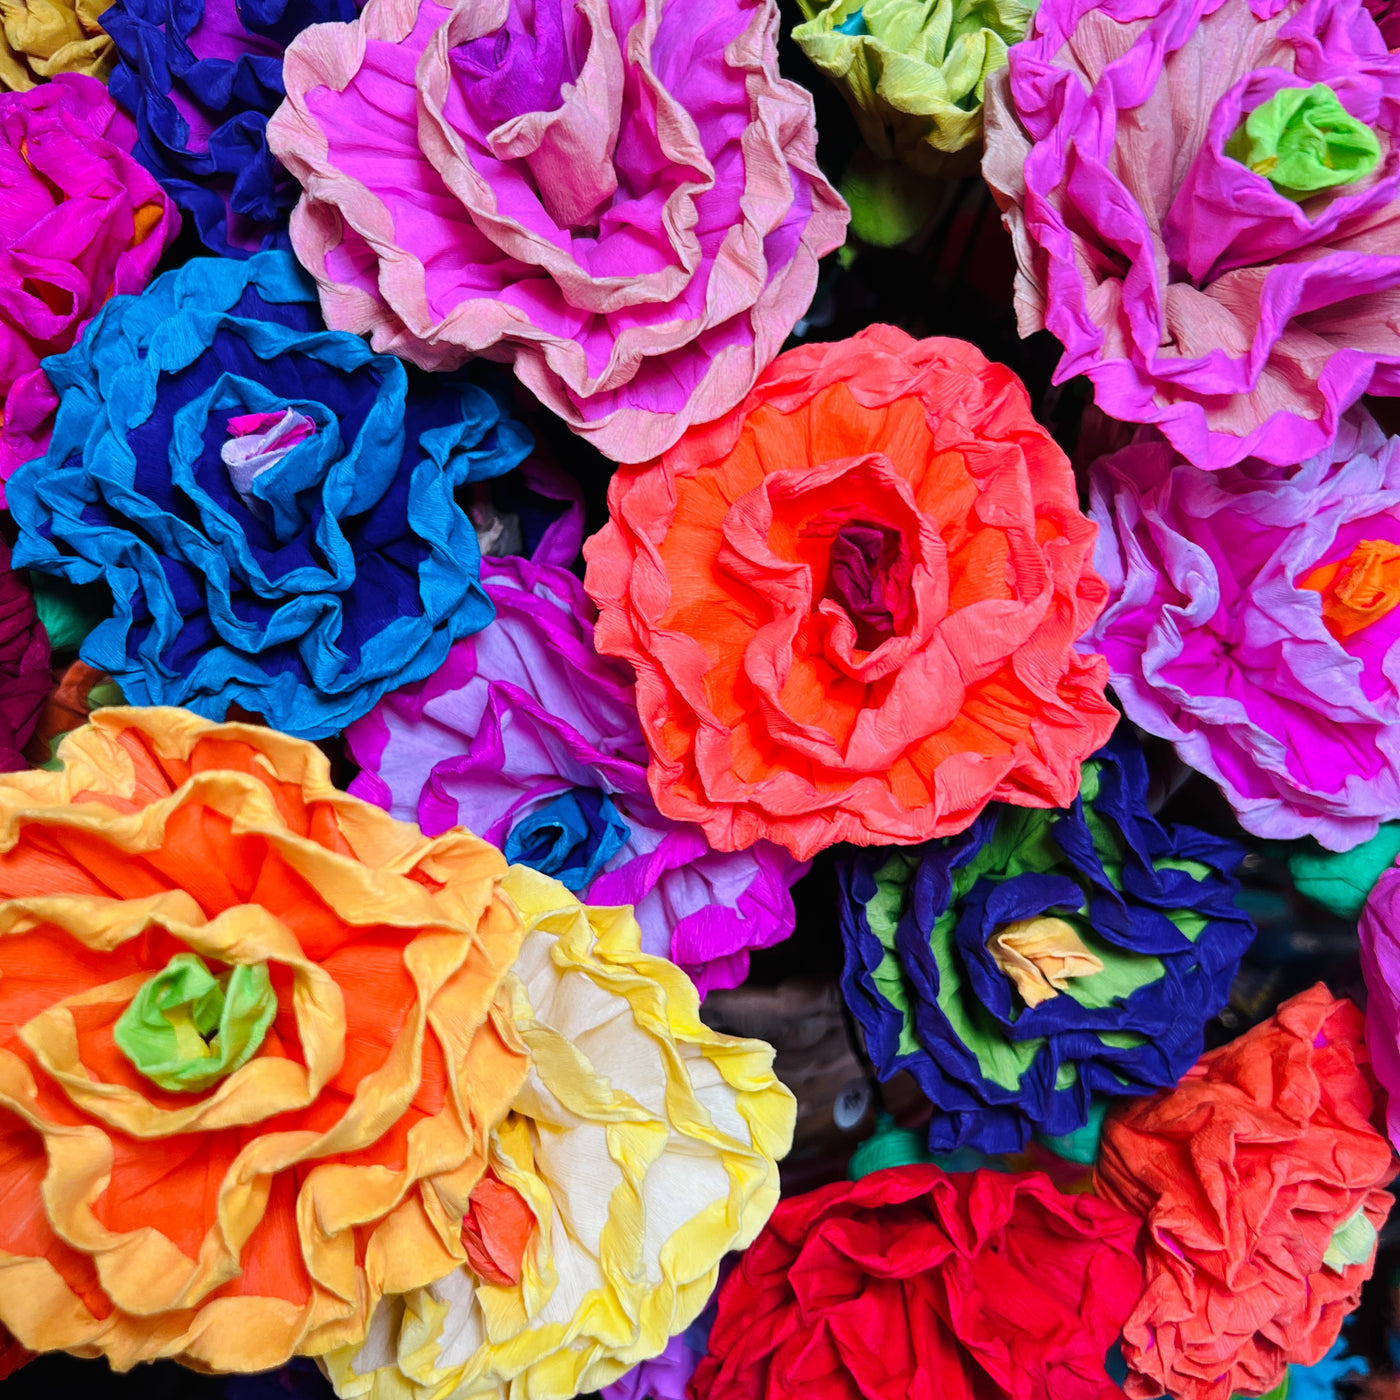 Close up view of a bundle of multi- colored paper flowers